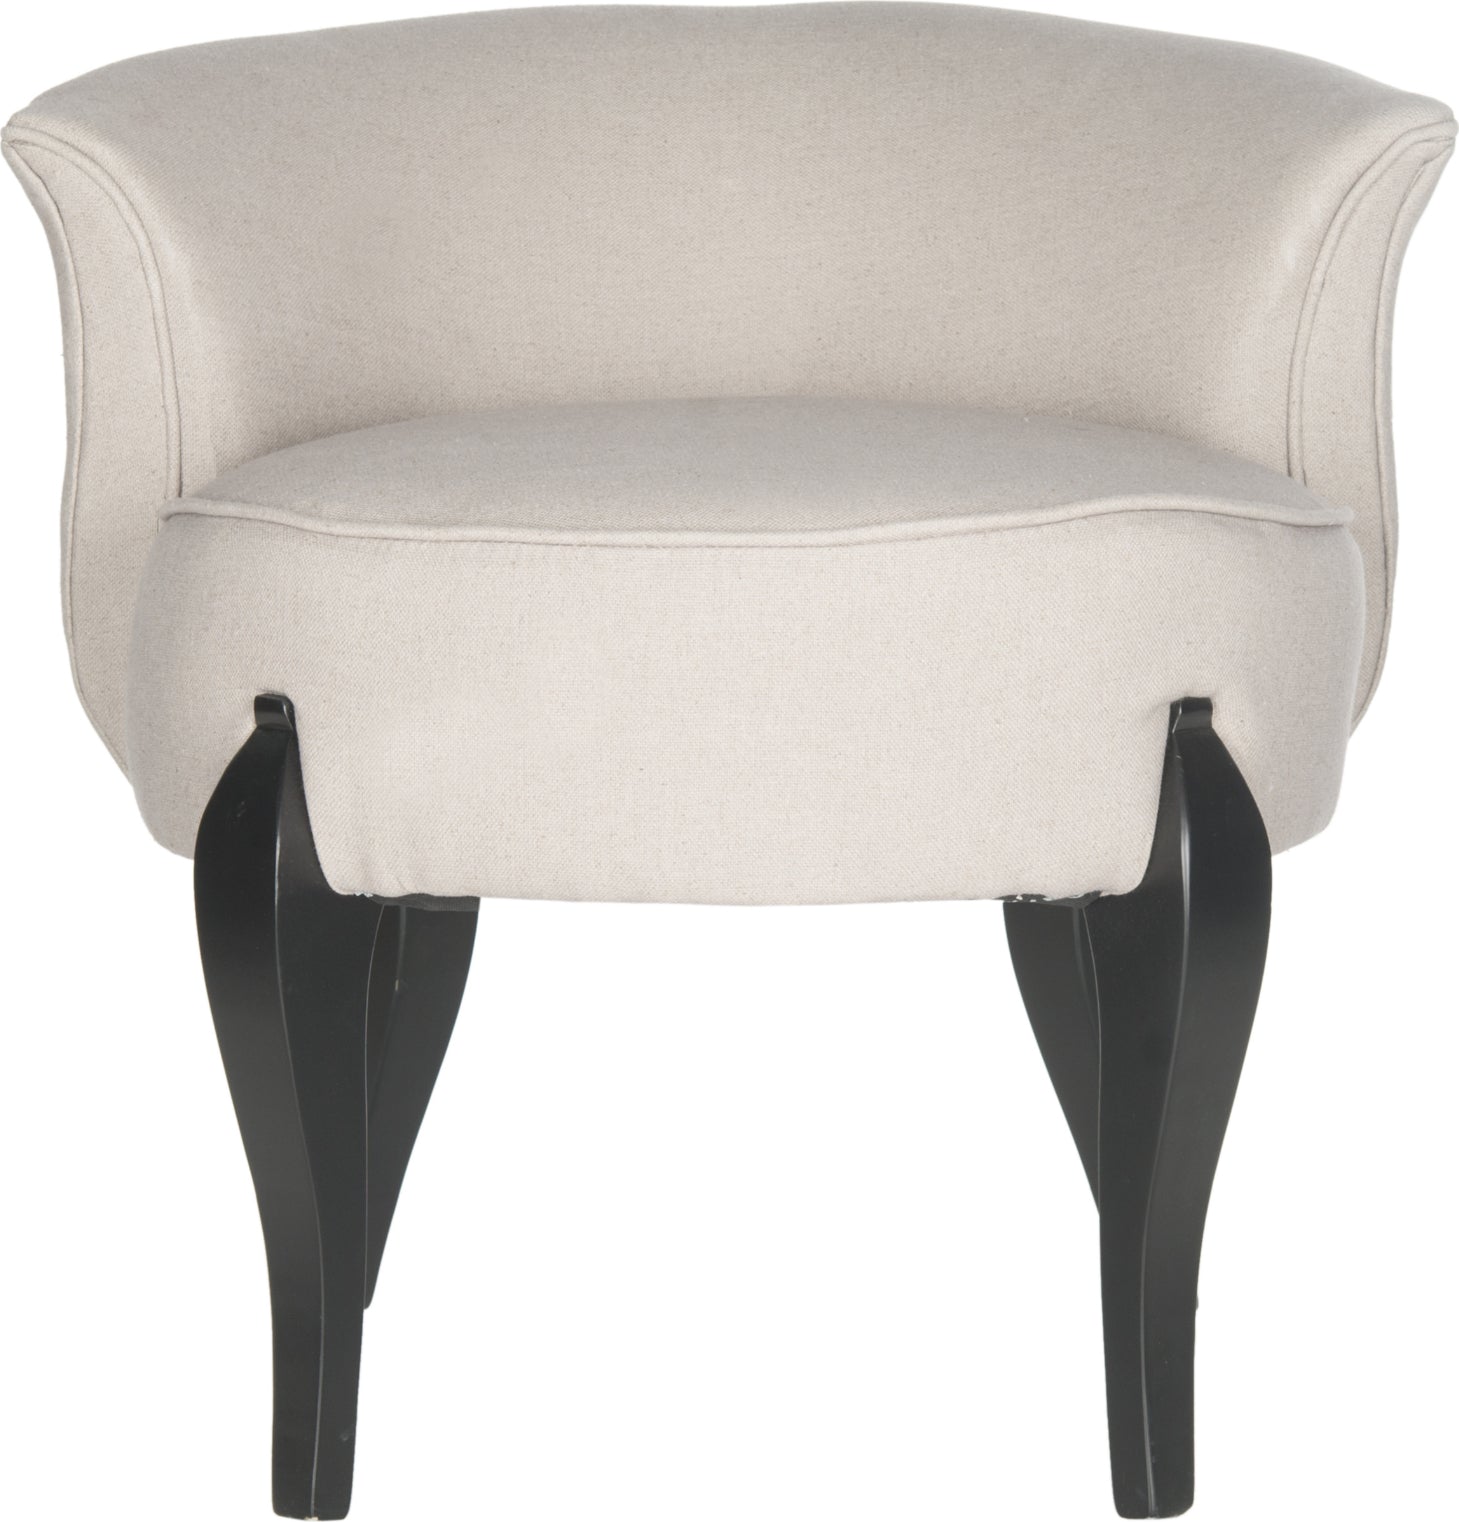 Safavieh Mora French Leg Linen Vanity Chair Taupe and Black Furniture main image